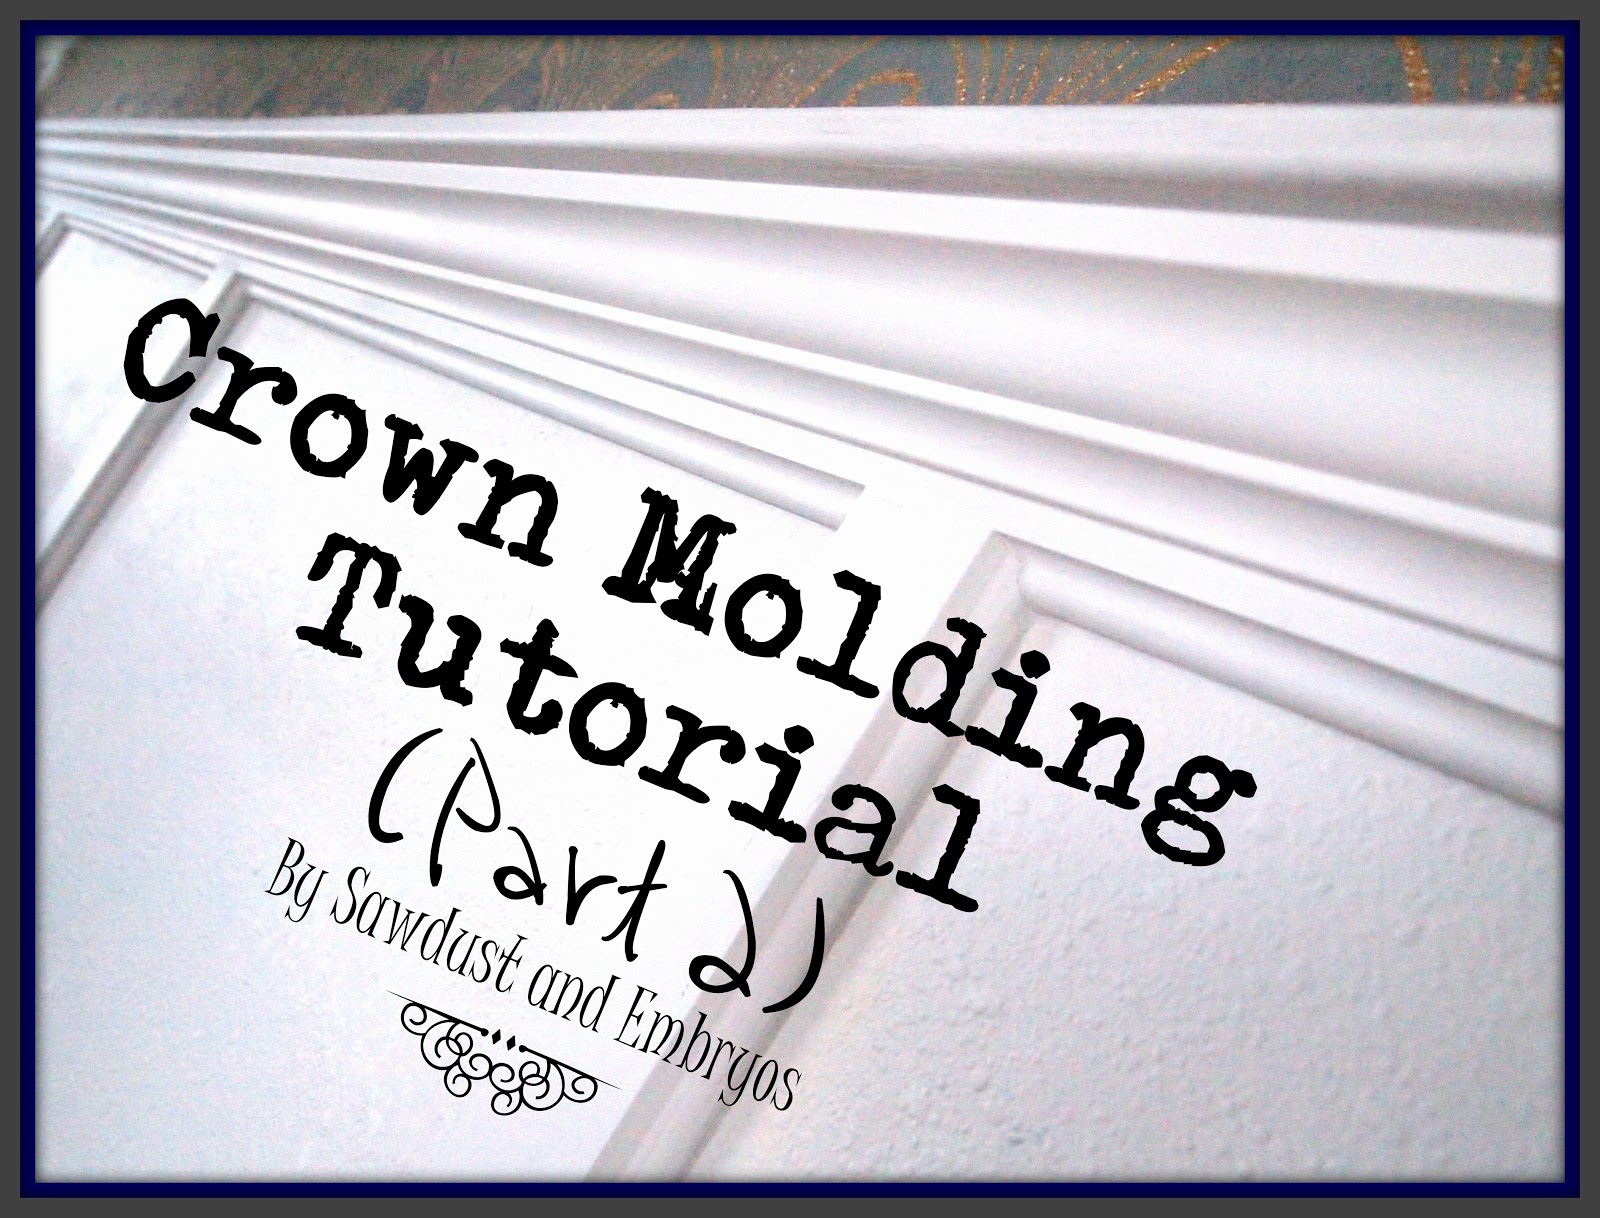 [Crown%2520Molding%2520Tutorial%2520%2528Part%25202%2529%2520by%2520Sawdust%2520and%2520Embryos%2521%255B6%255D.jpg]